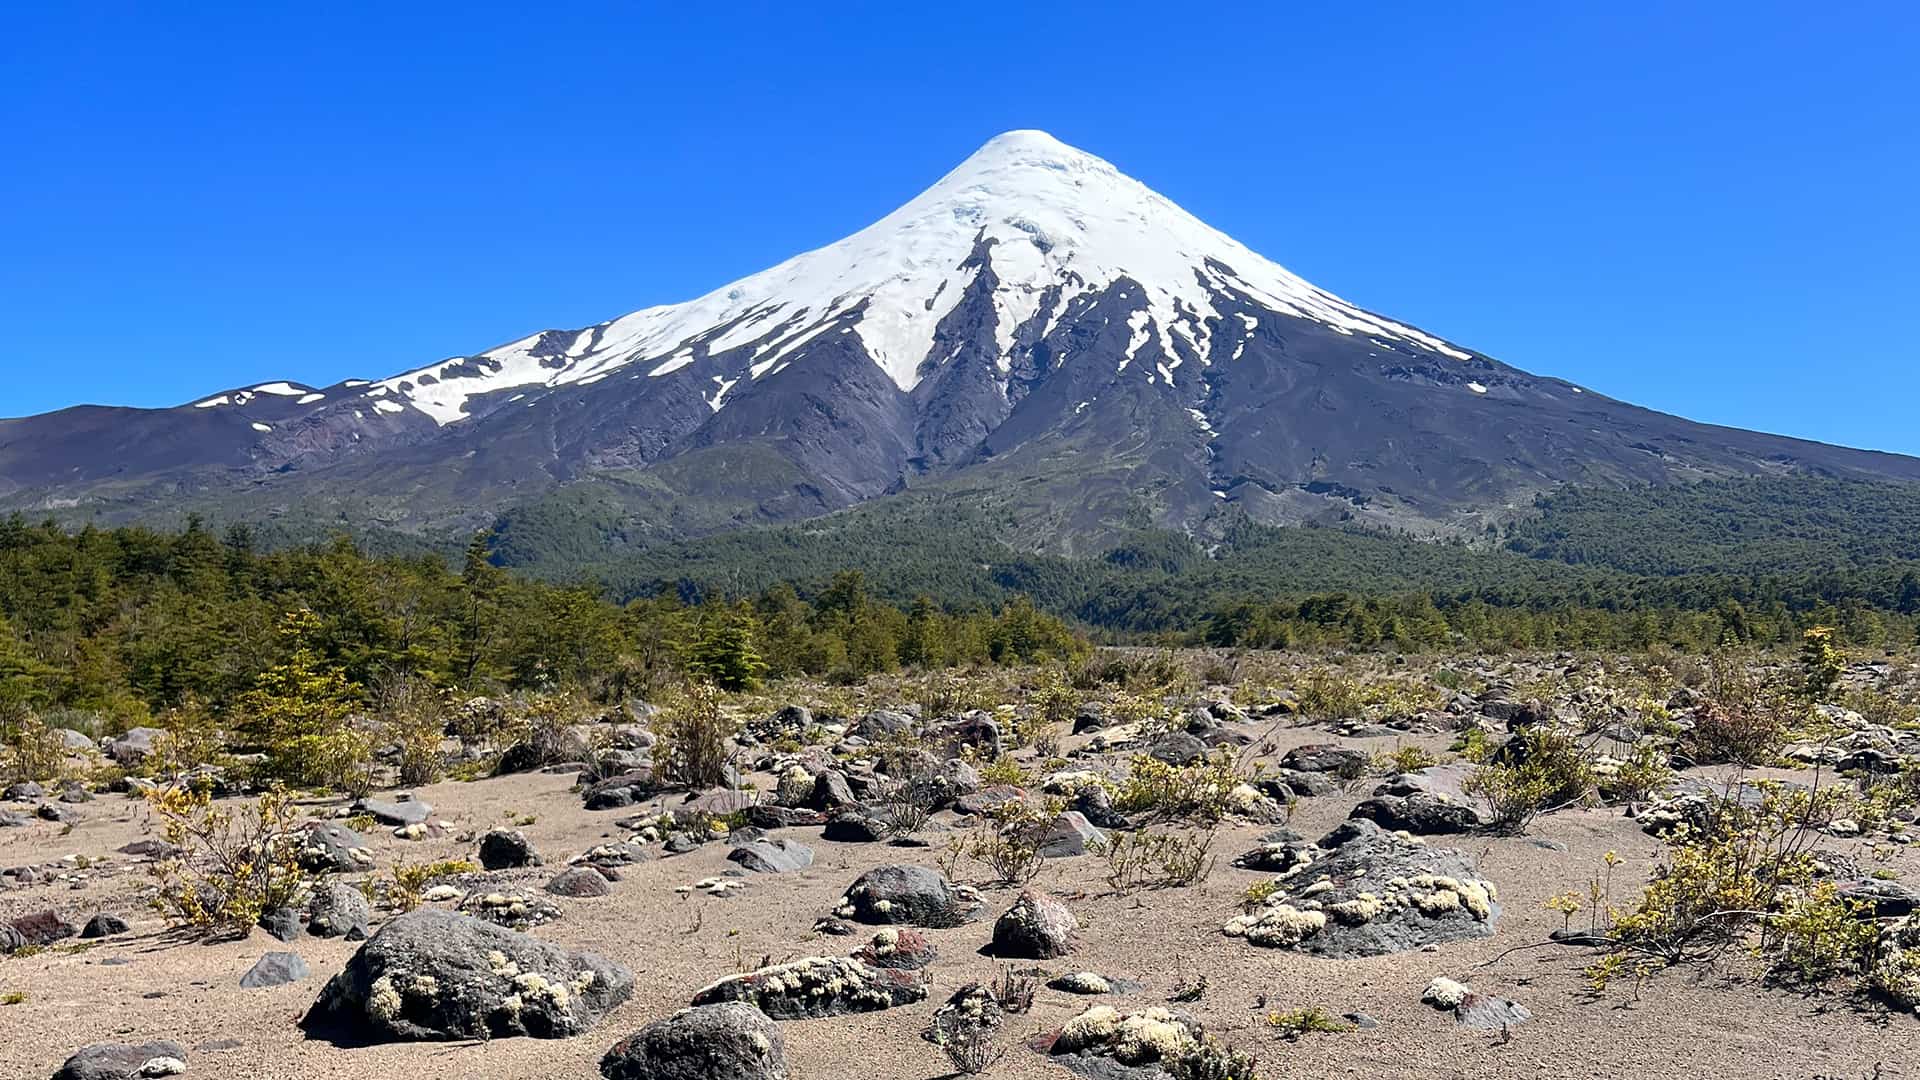 View of Osorno volcano from the hike